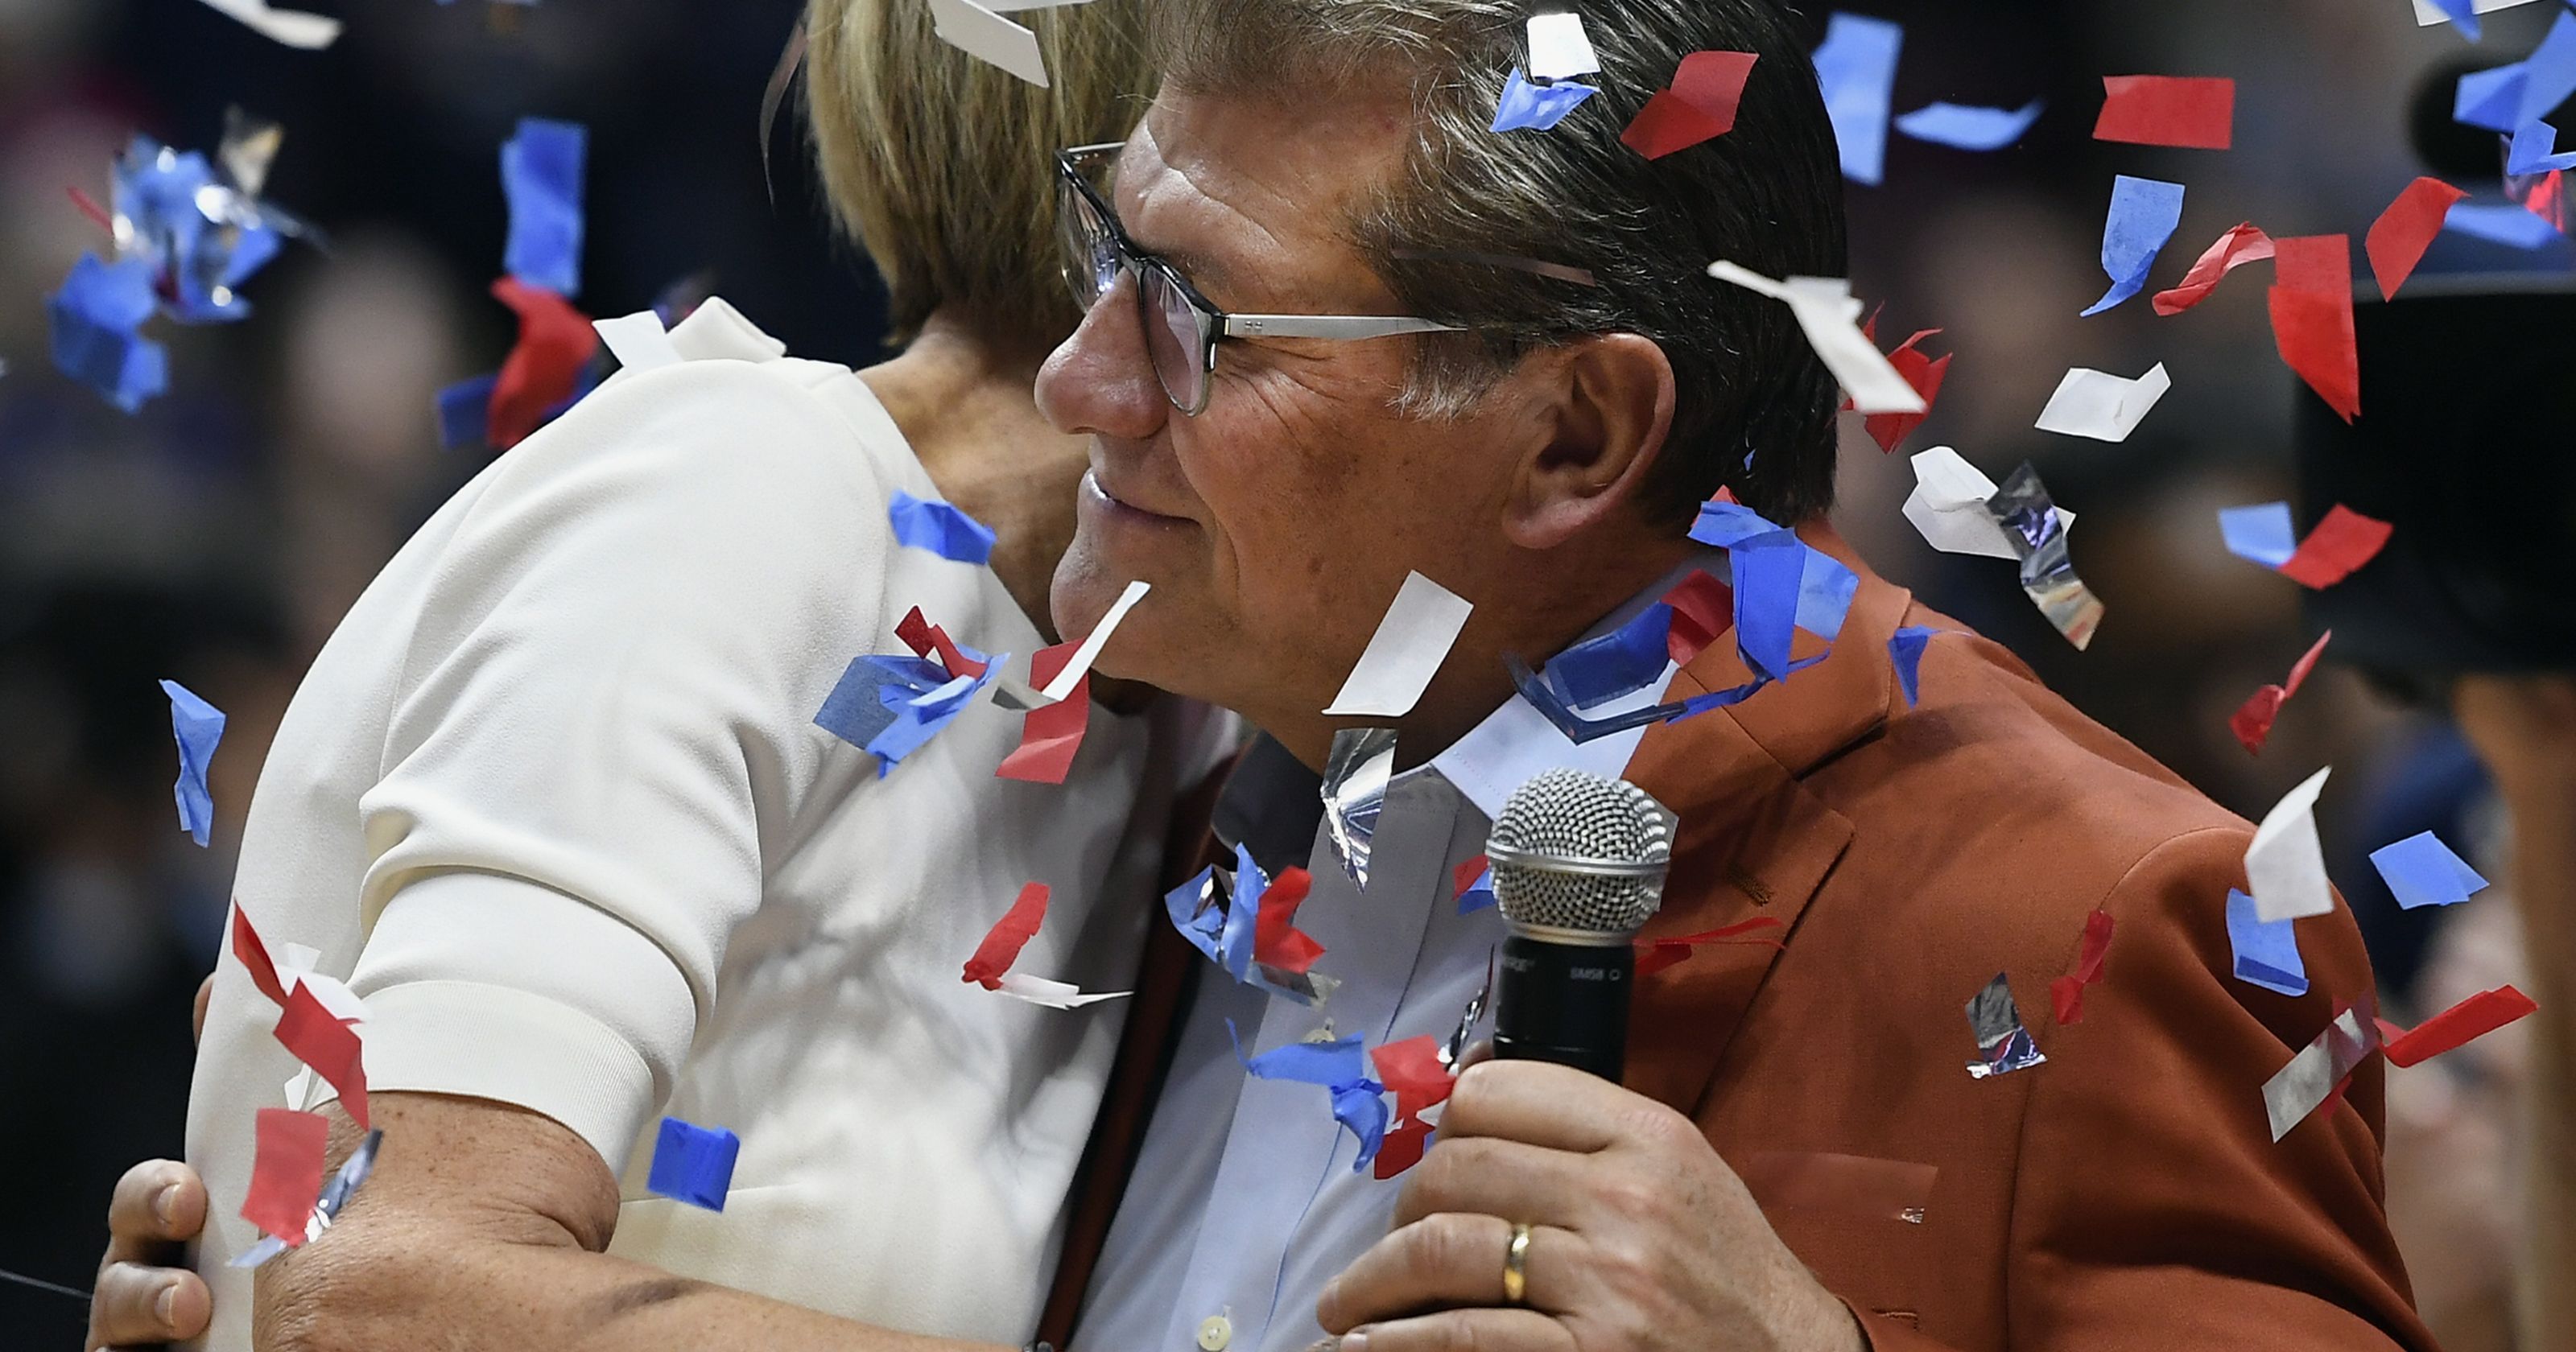 Chris Dailey and Geno Auriemma celebrate after their 1,000 win. (Associated Press)